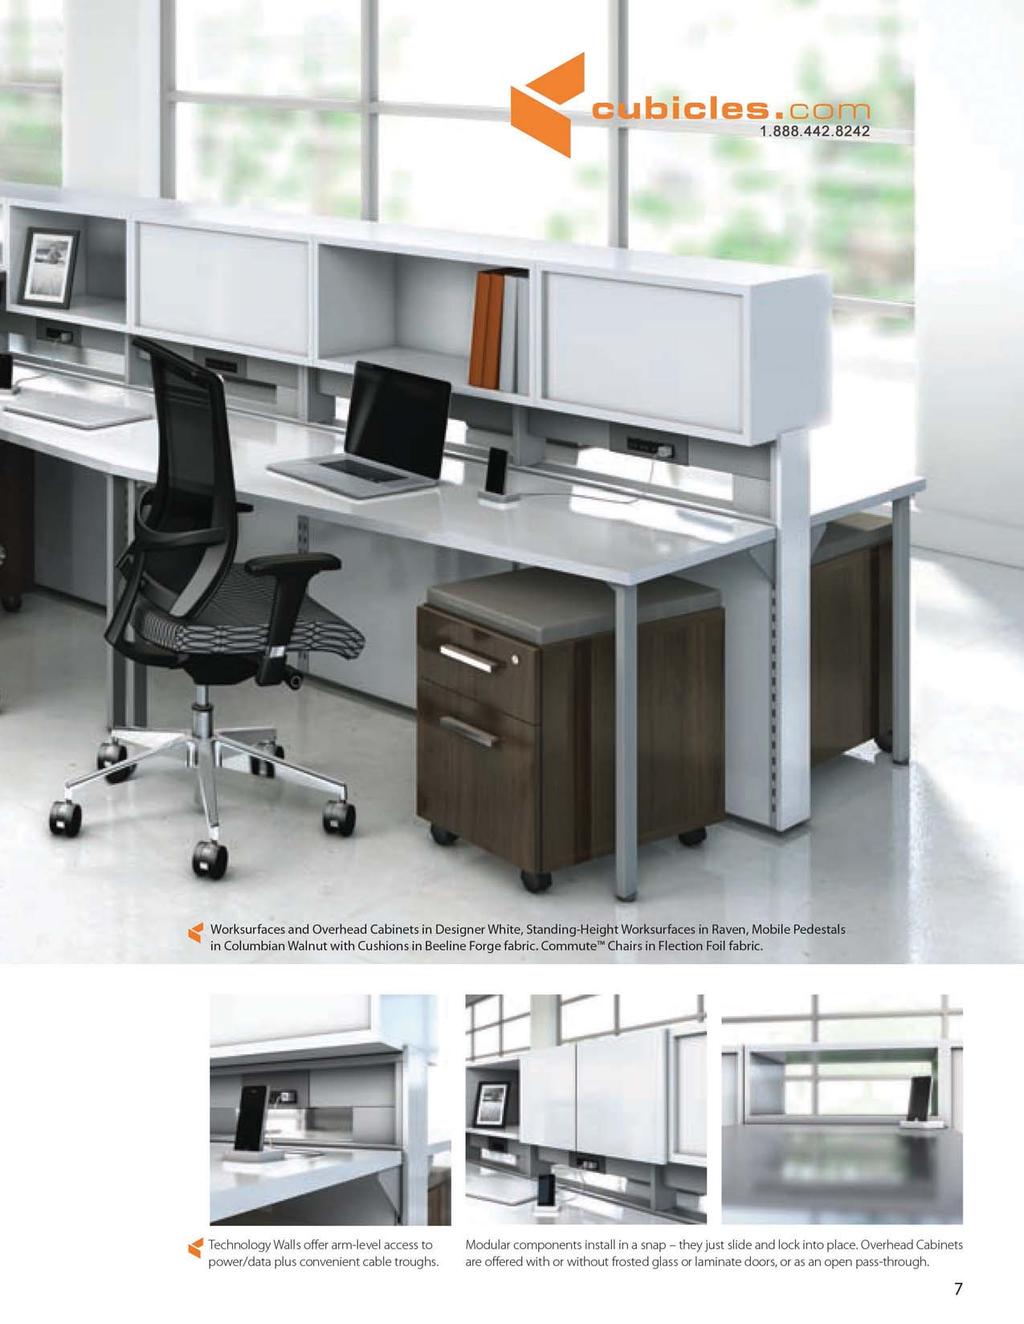 c bicles.cc''tl 1.868.442.8242 I( Worksurfaces and Overhead Cabinets in Designer While.